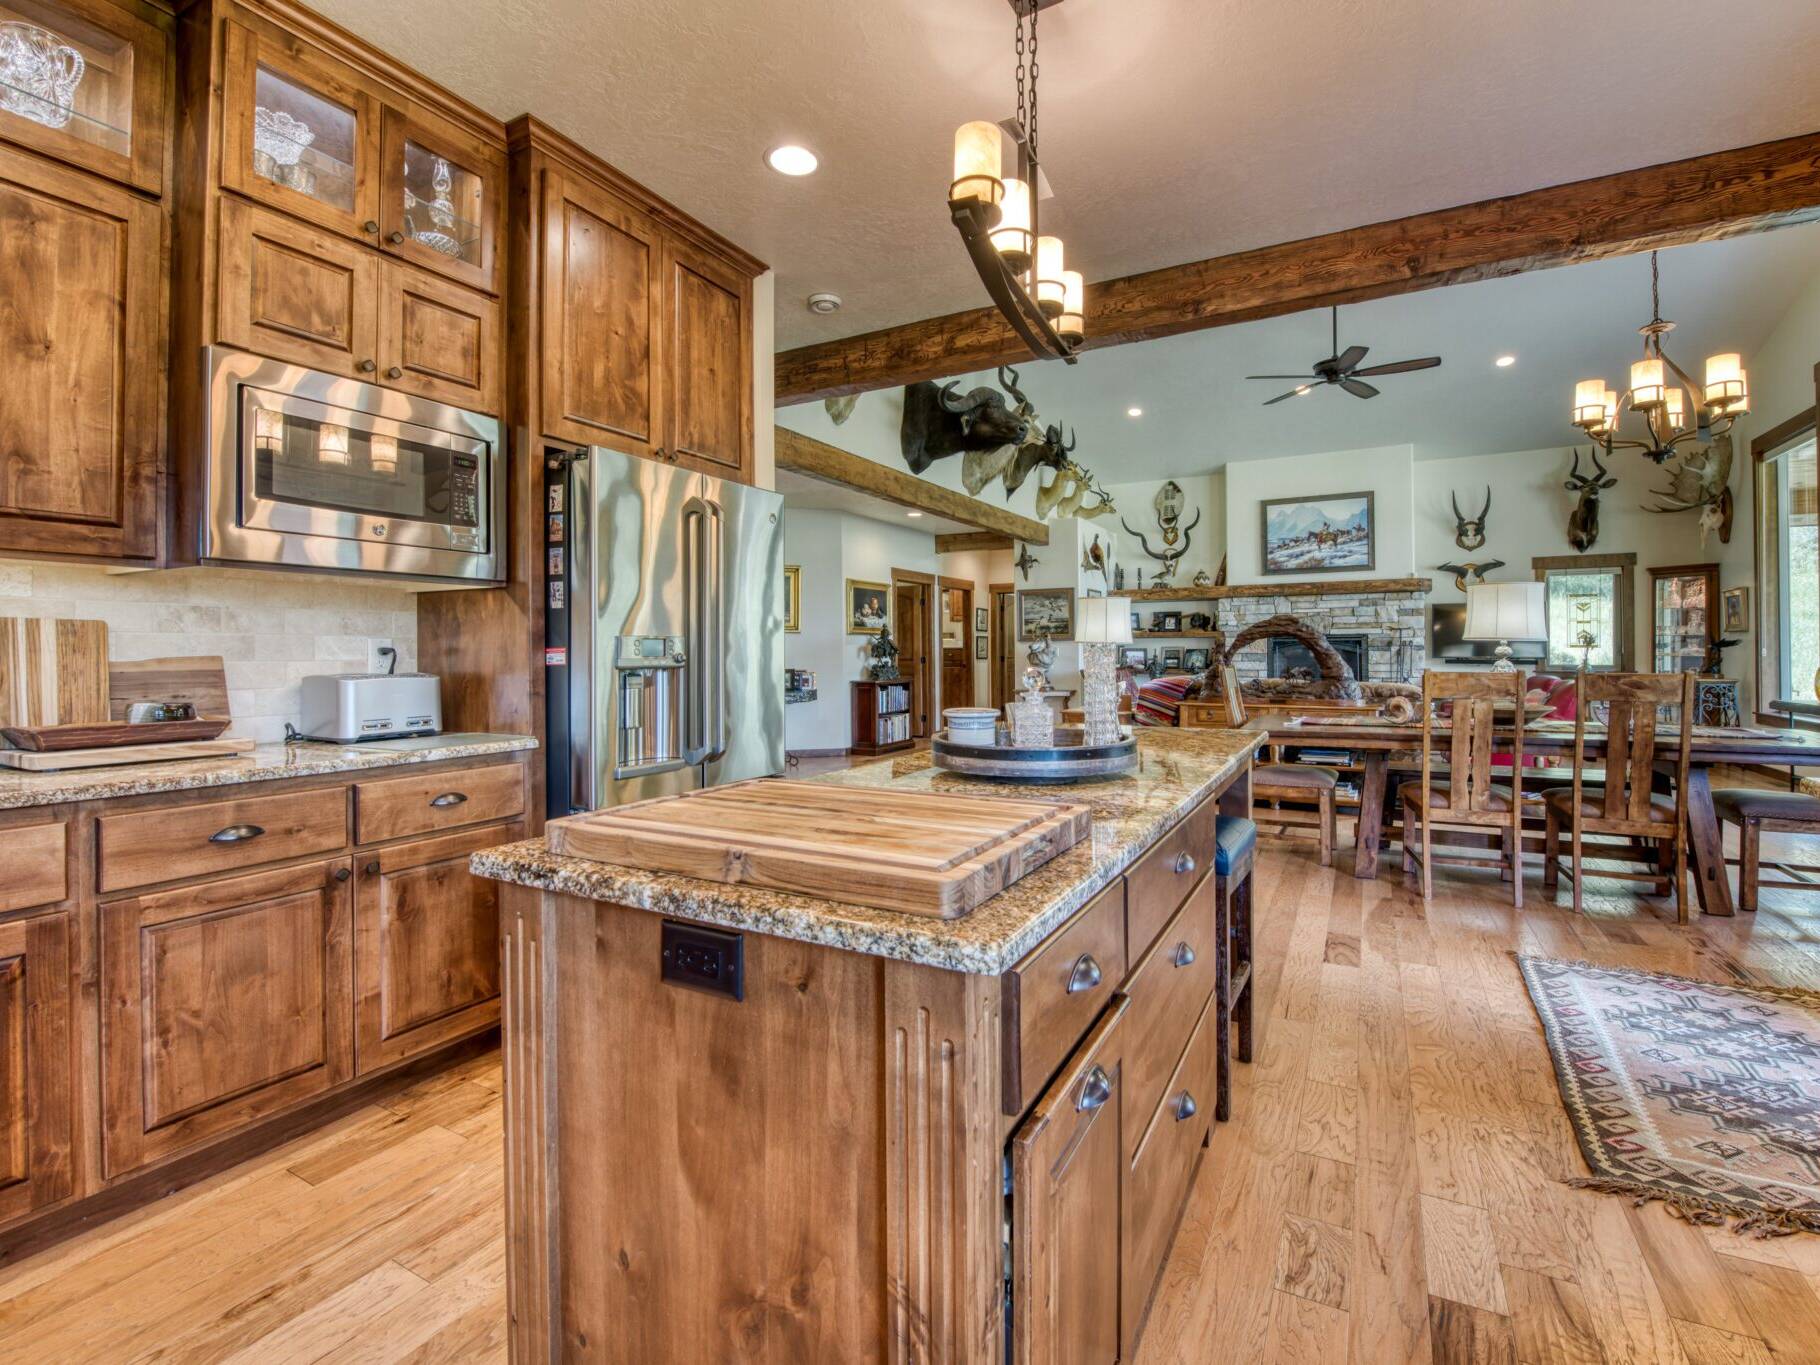 Kitchen with an island, rustic stained wood cabinets, granite countertops, tile backsplash in a custom home near Hamilton, MT